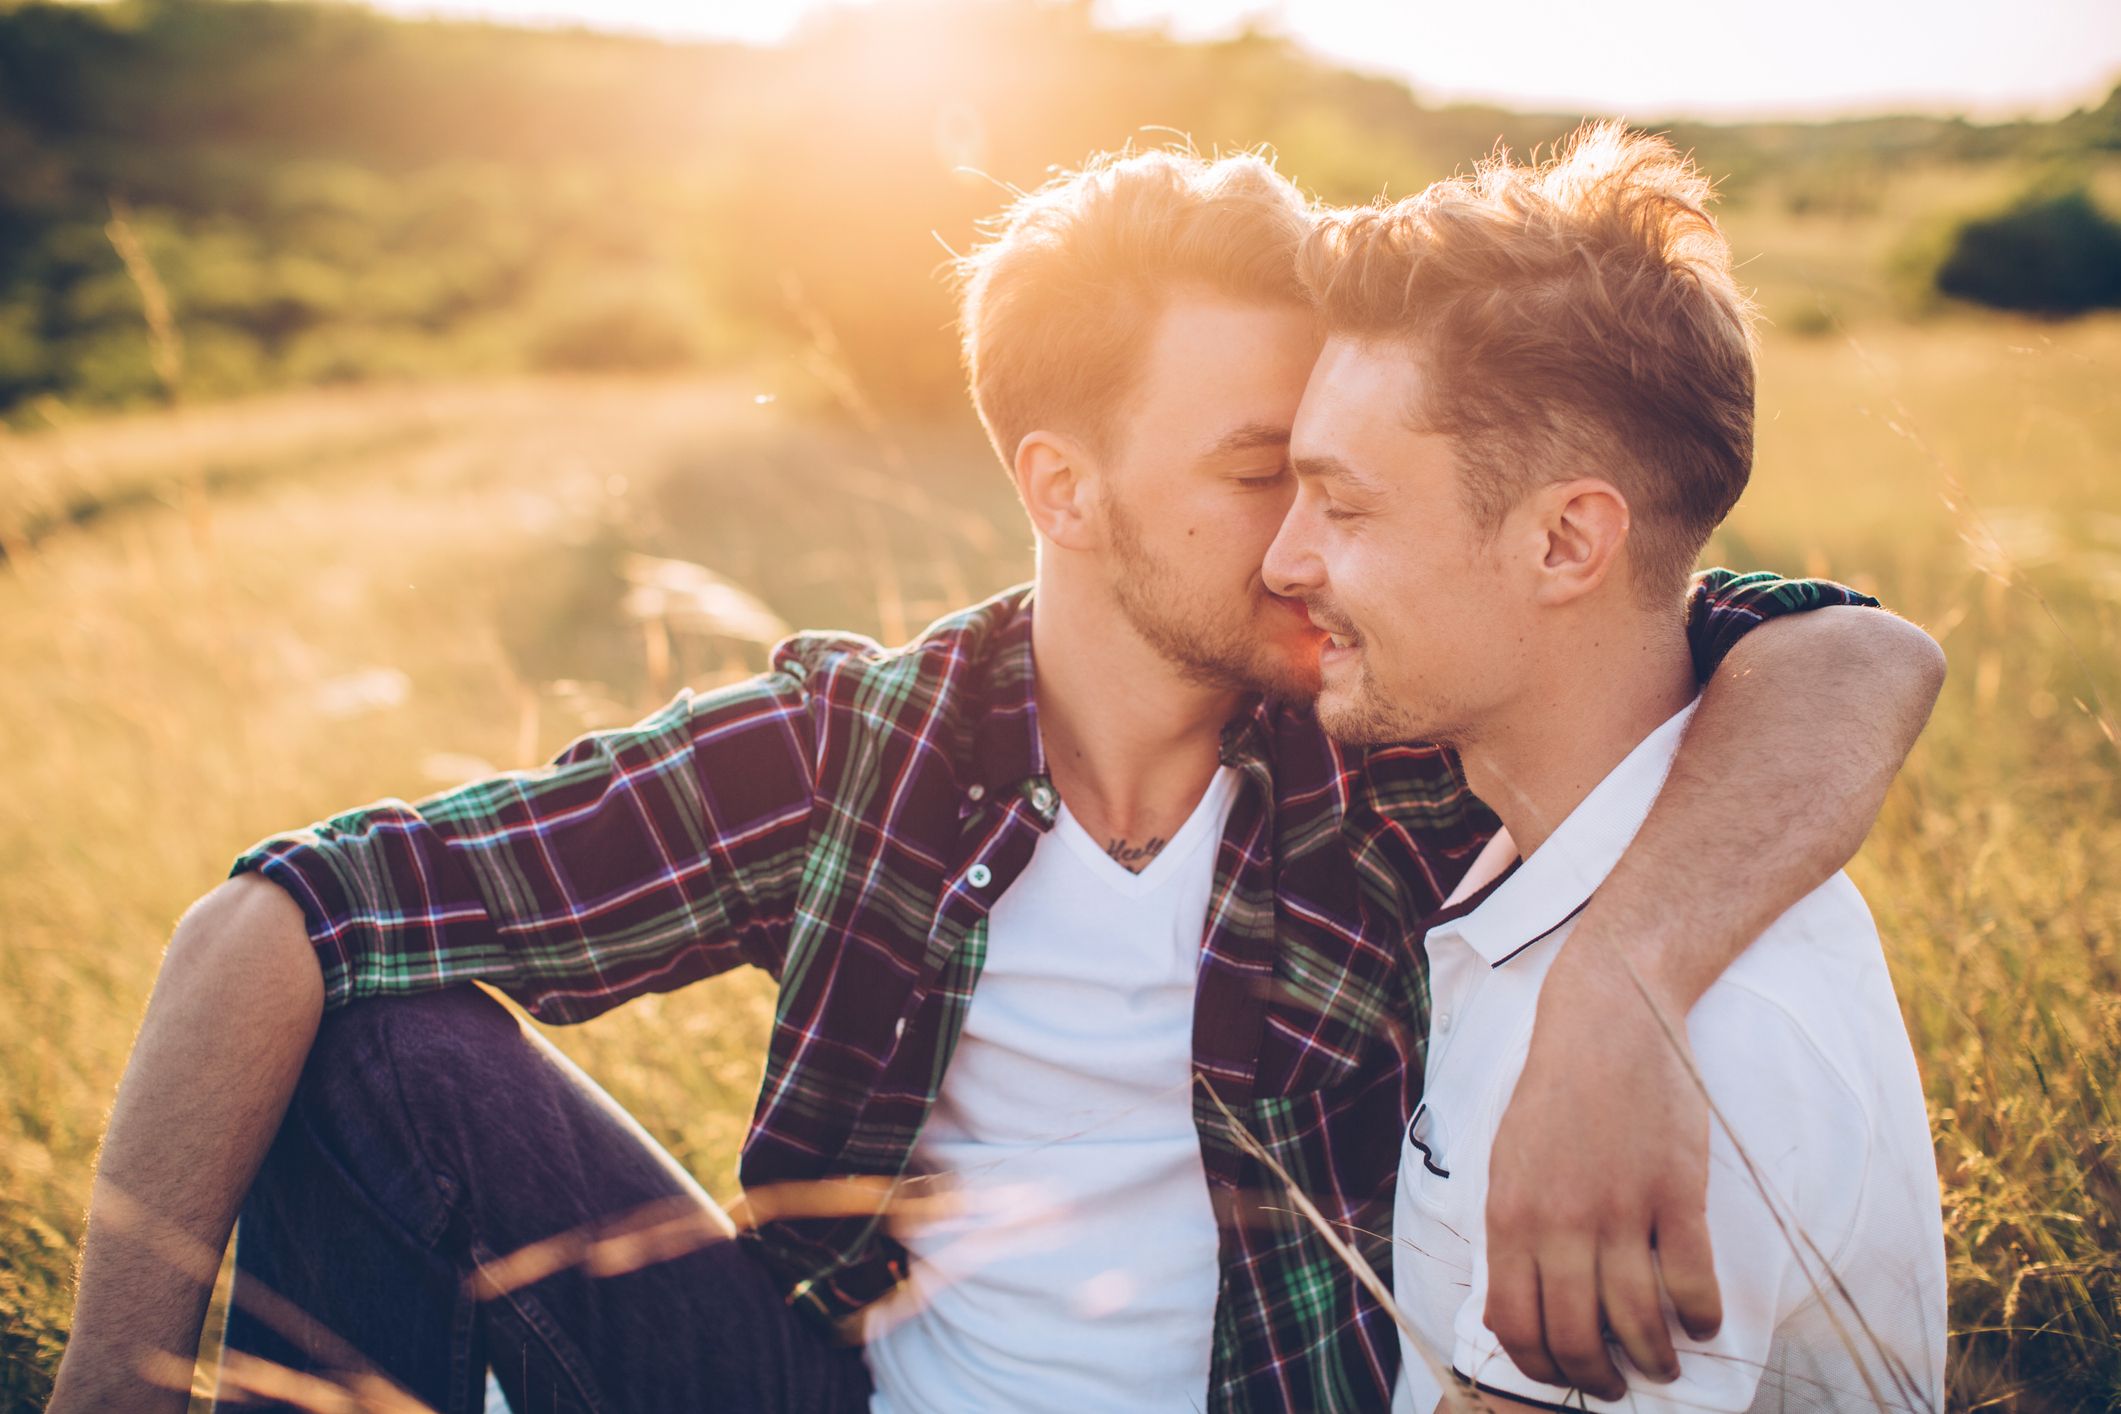 Bisexual Guys on the Differences Between Dating Men and Women